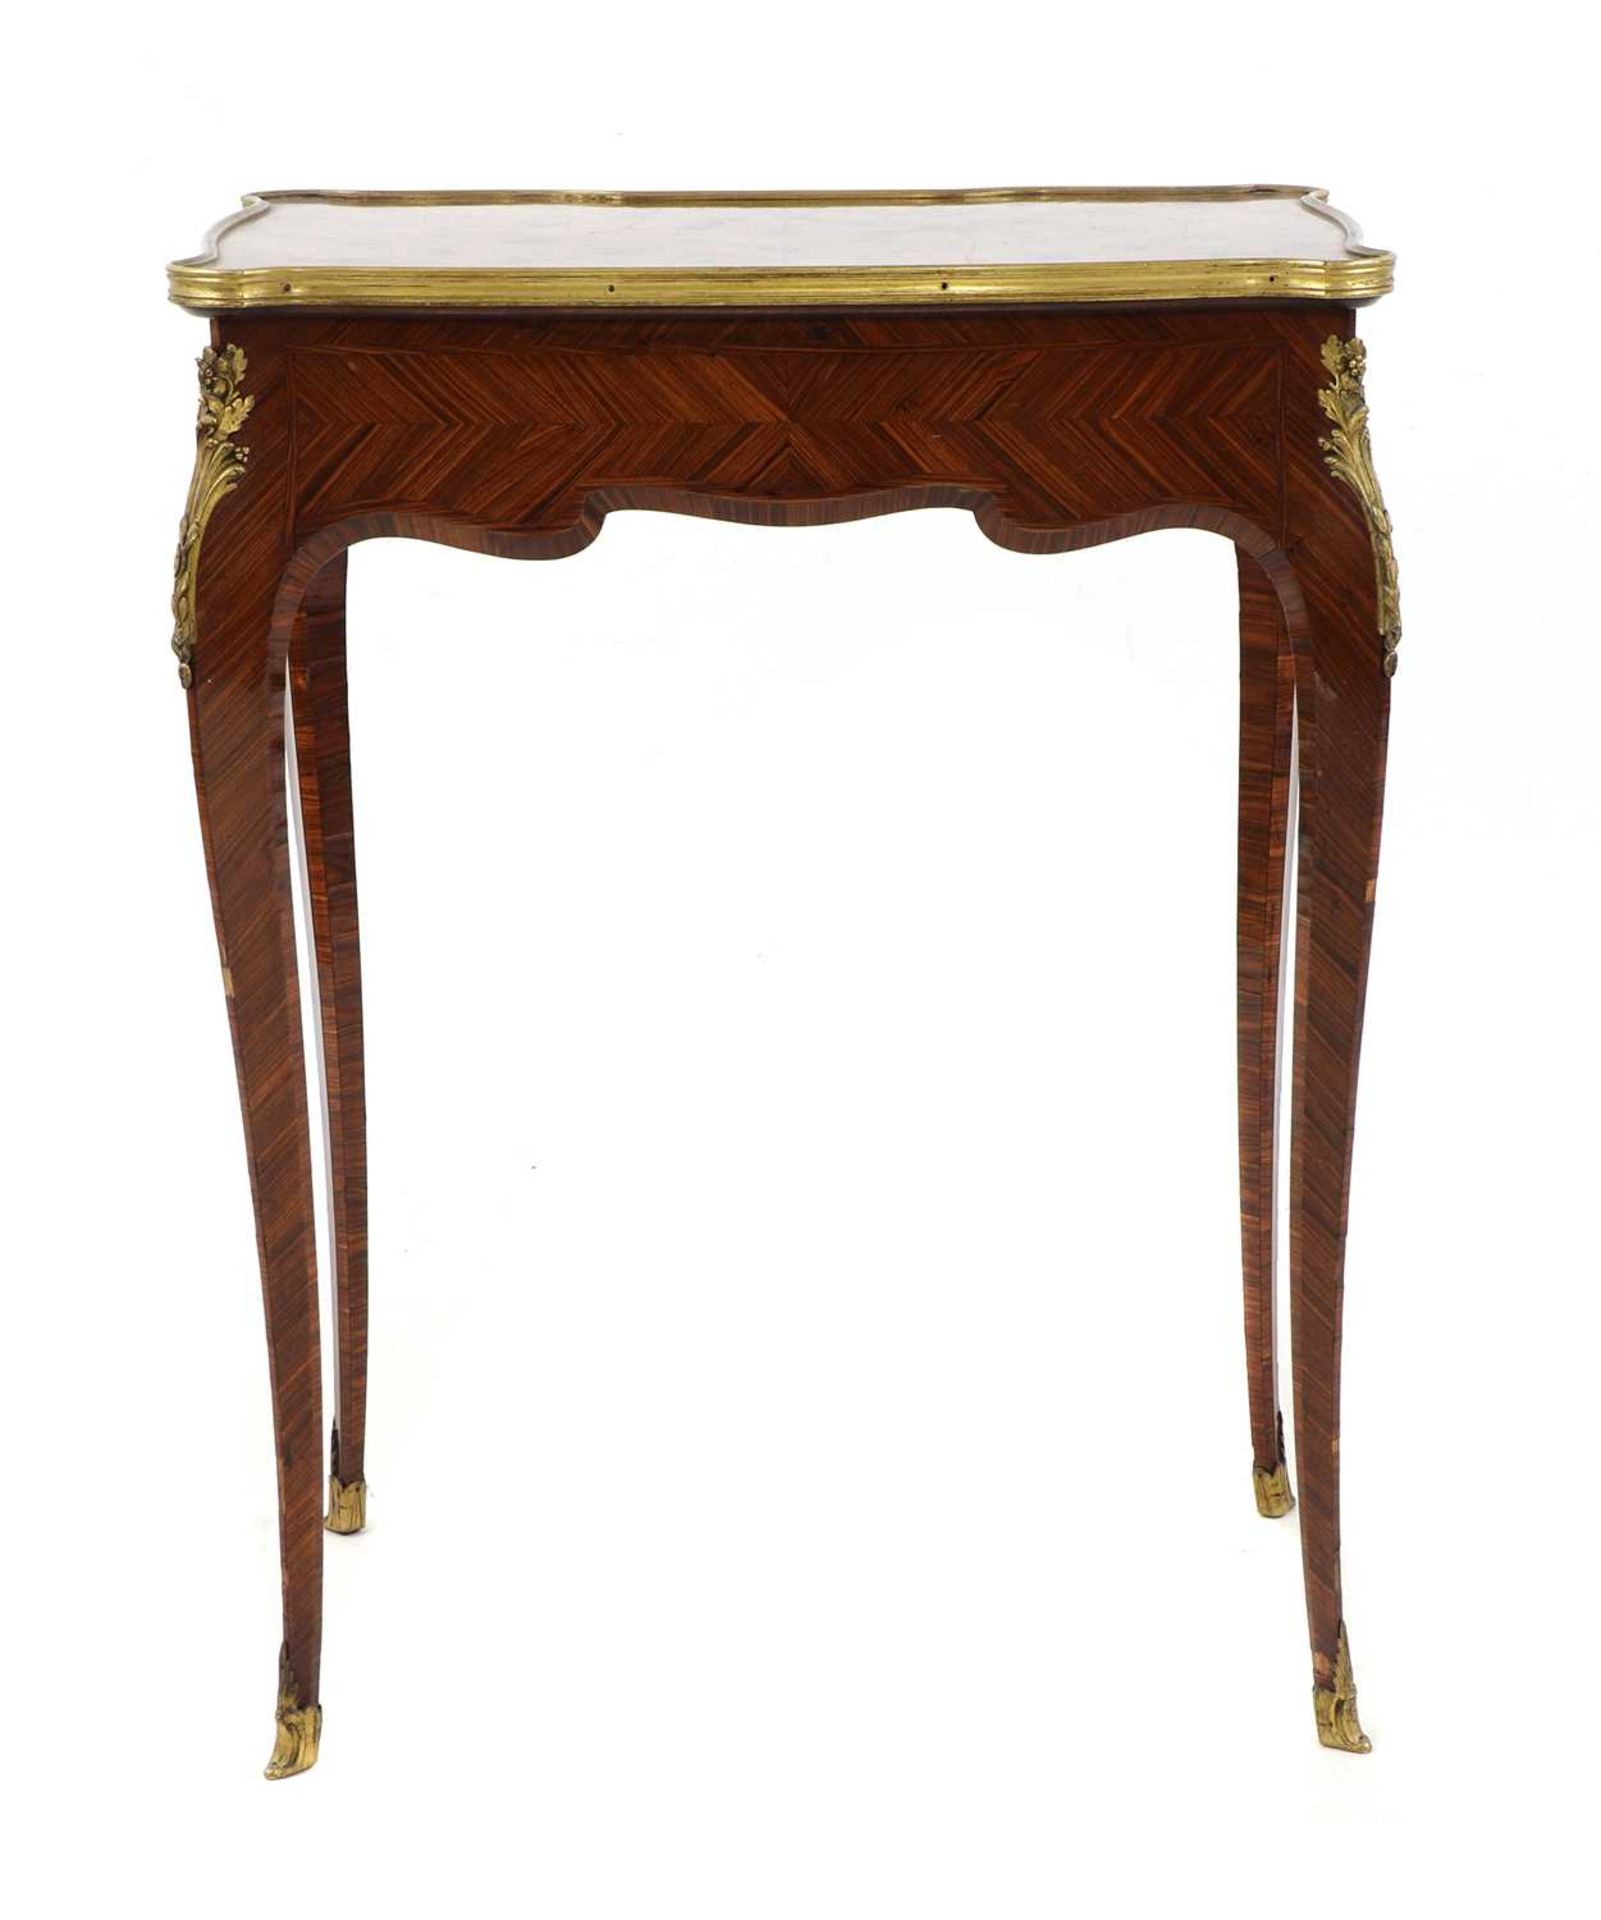 A Louis XV-style kingwood and ormolu-mounted side table, - Image 4 of 6